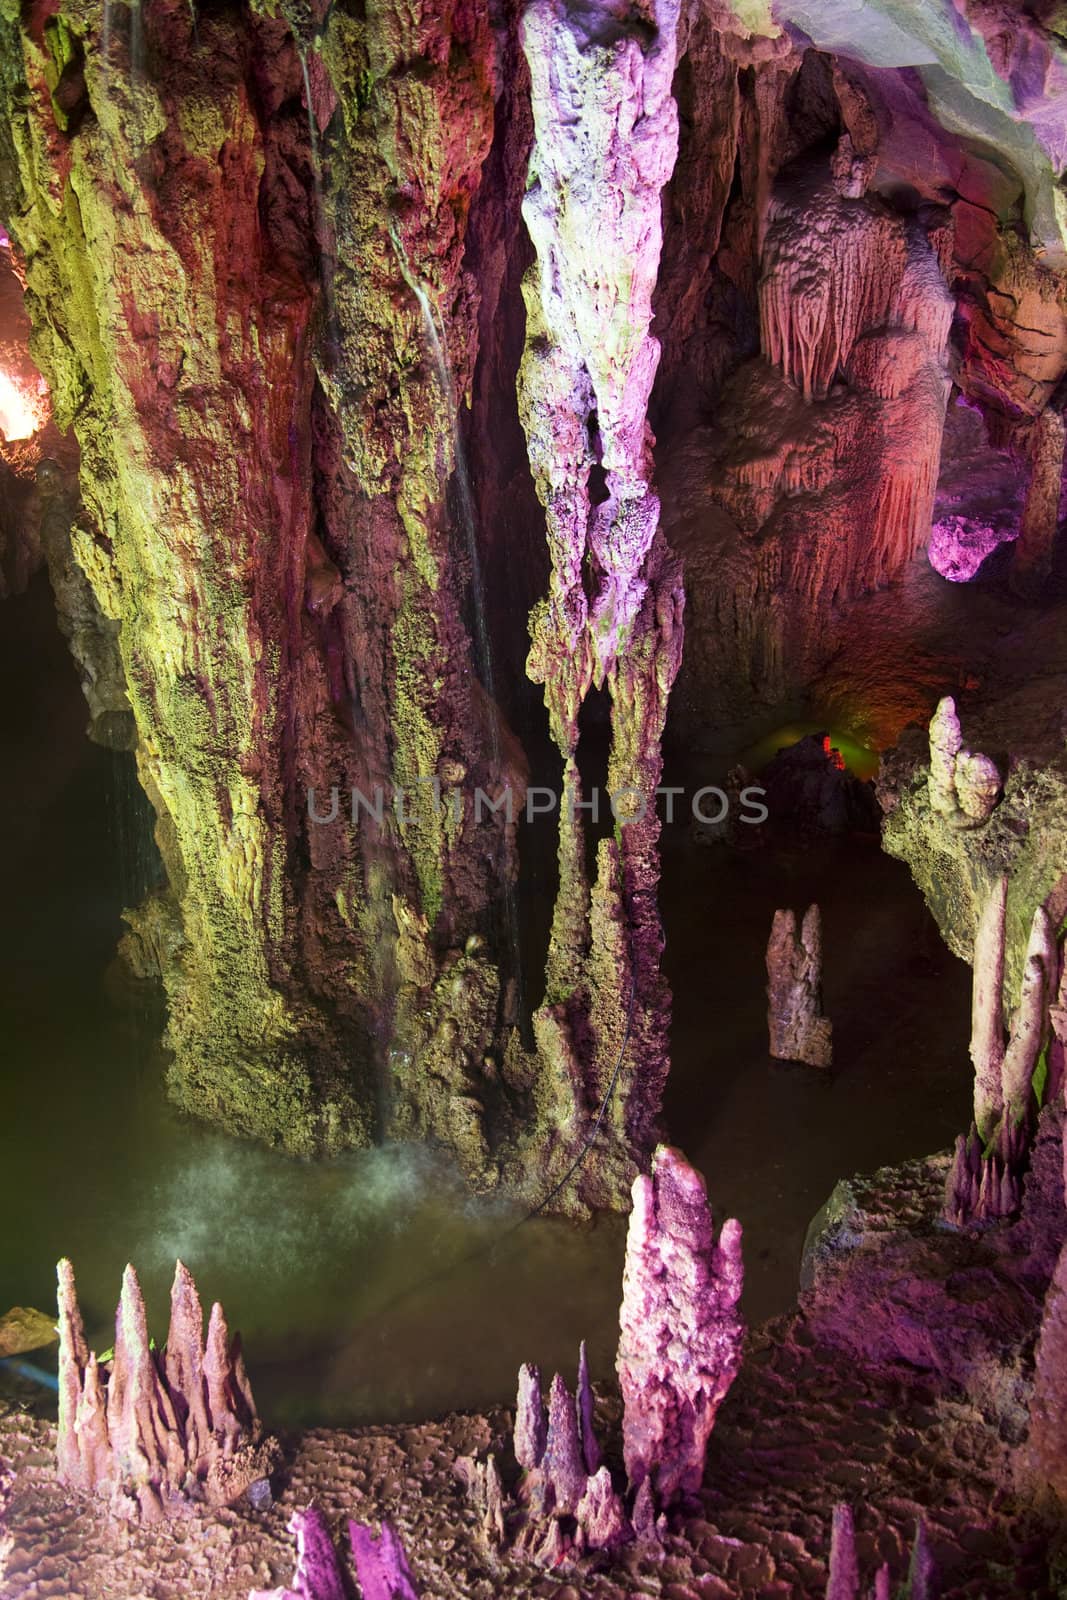 Image of stalactite and stalagmite formations all lighted up at Assembly Dragon Cave, Yangshuo, Guilin, China.